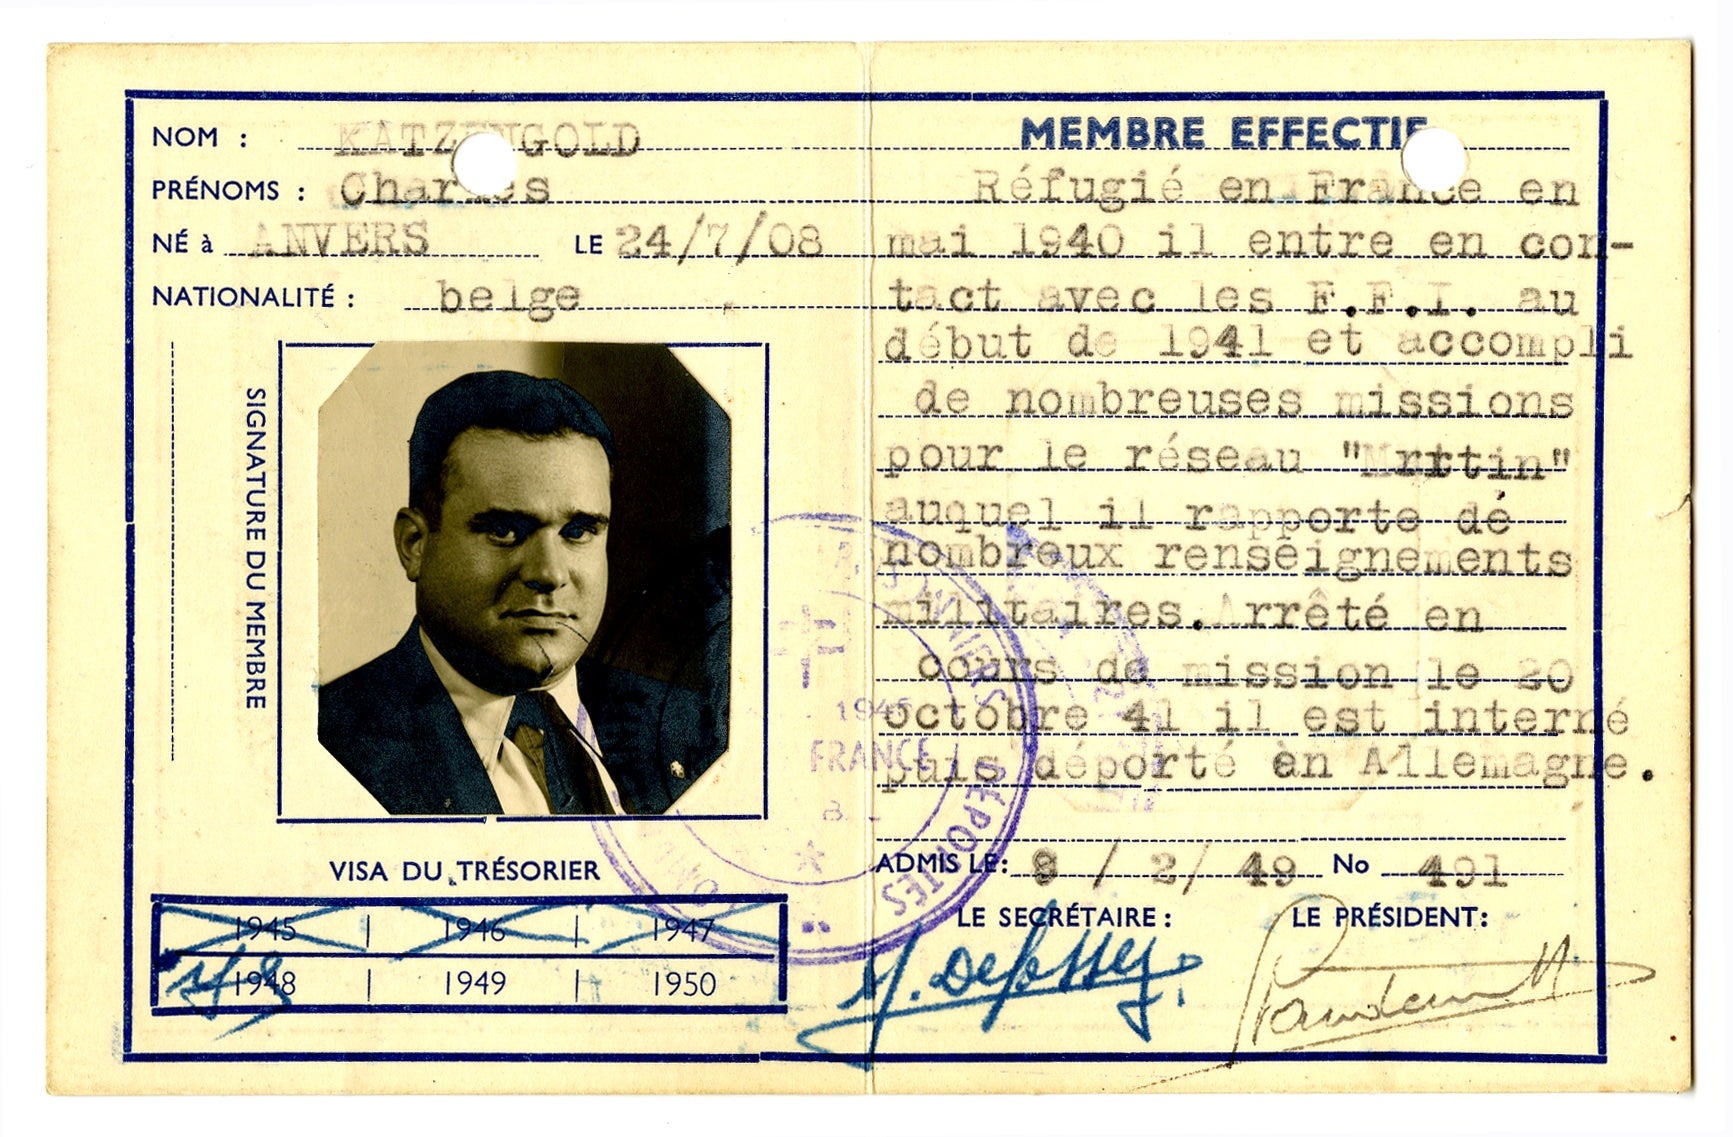 A card with French writing, and a photo of a middle-aged man. 